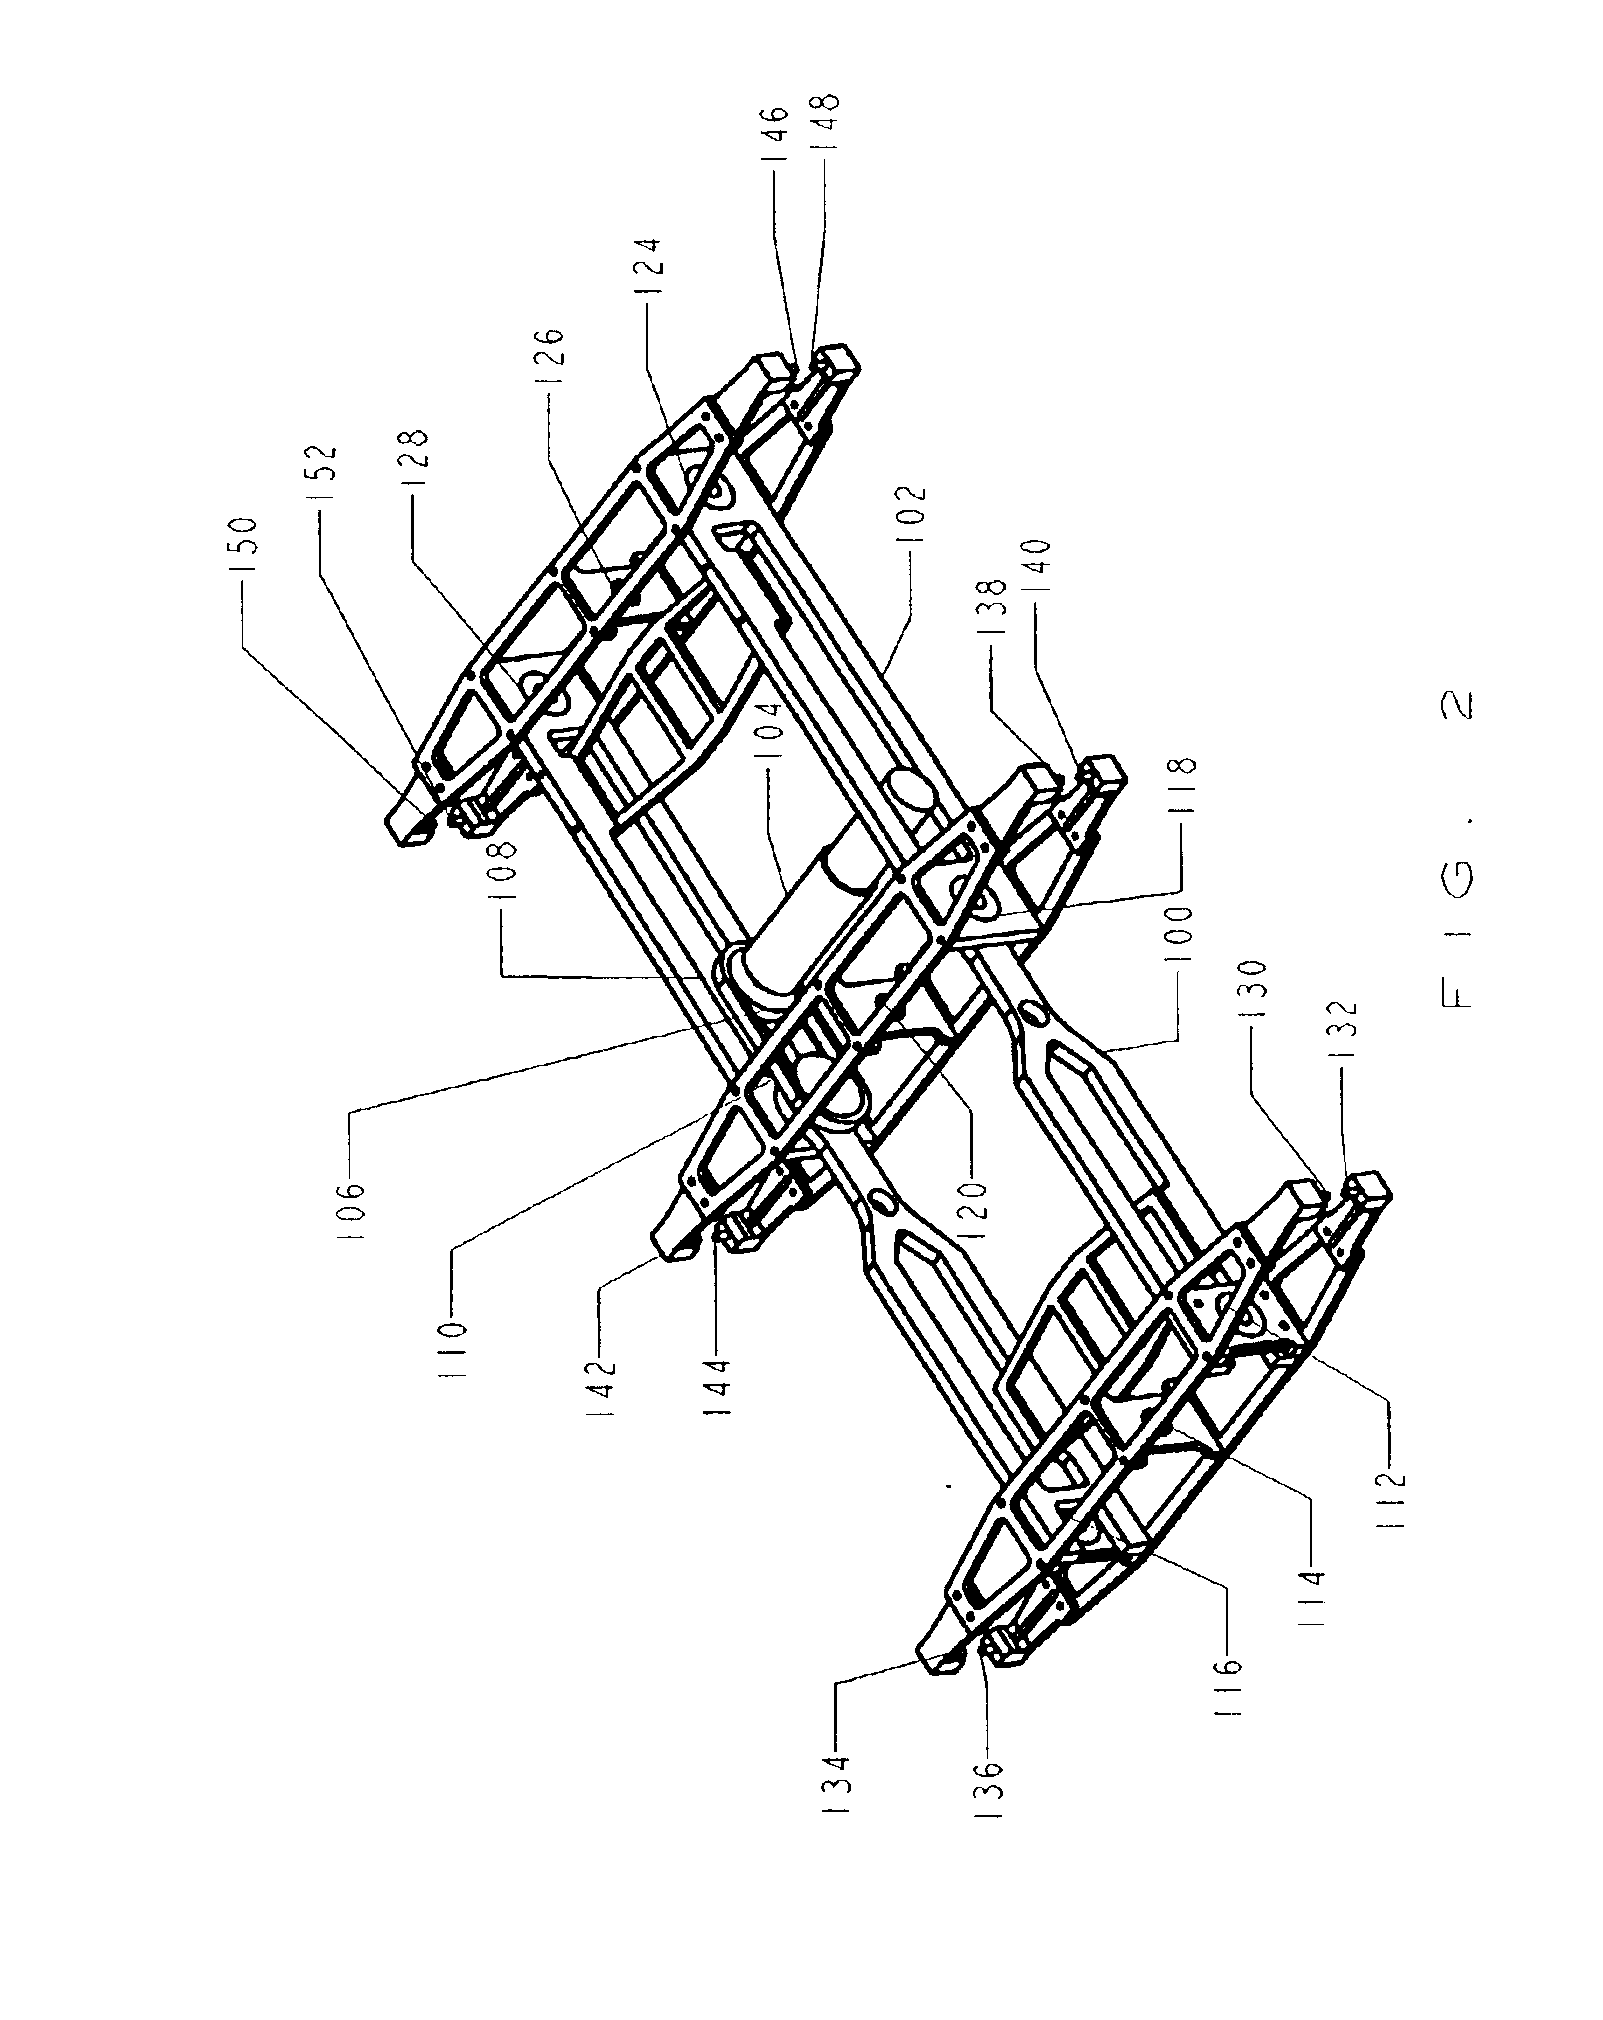 Vehicle with compliant drive train